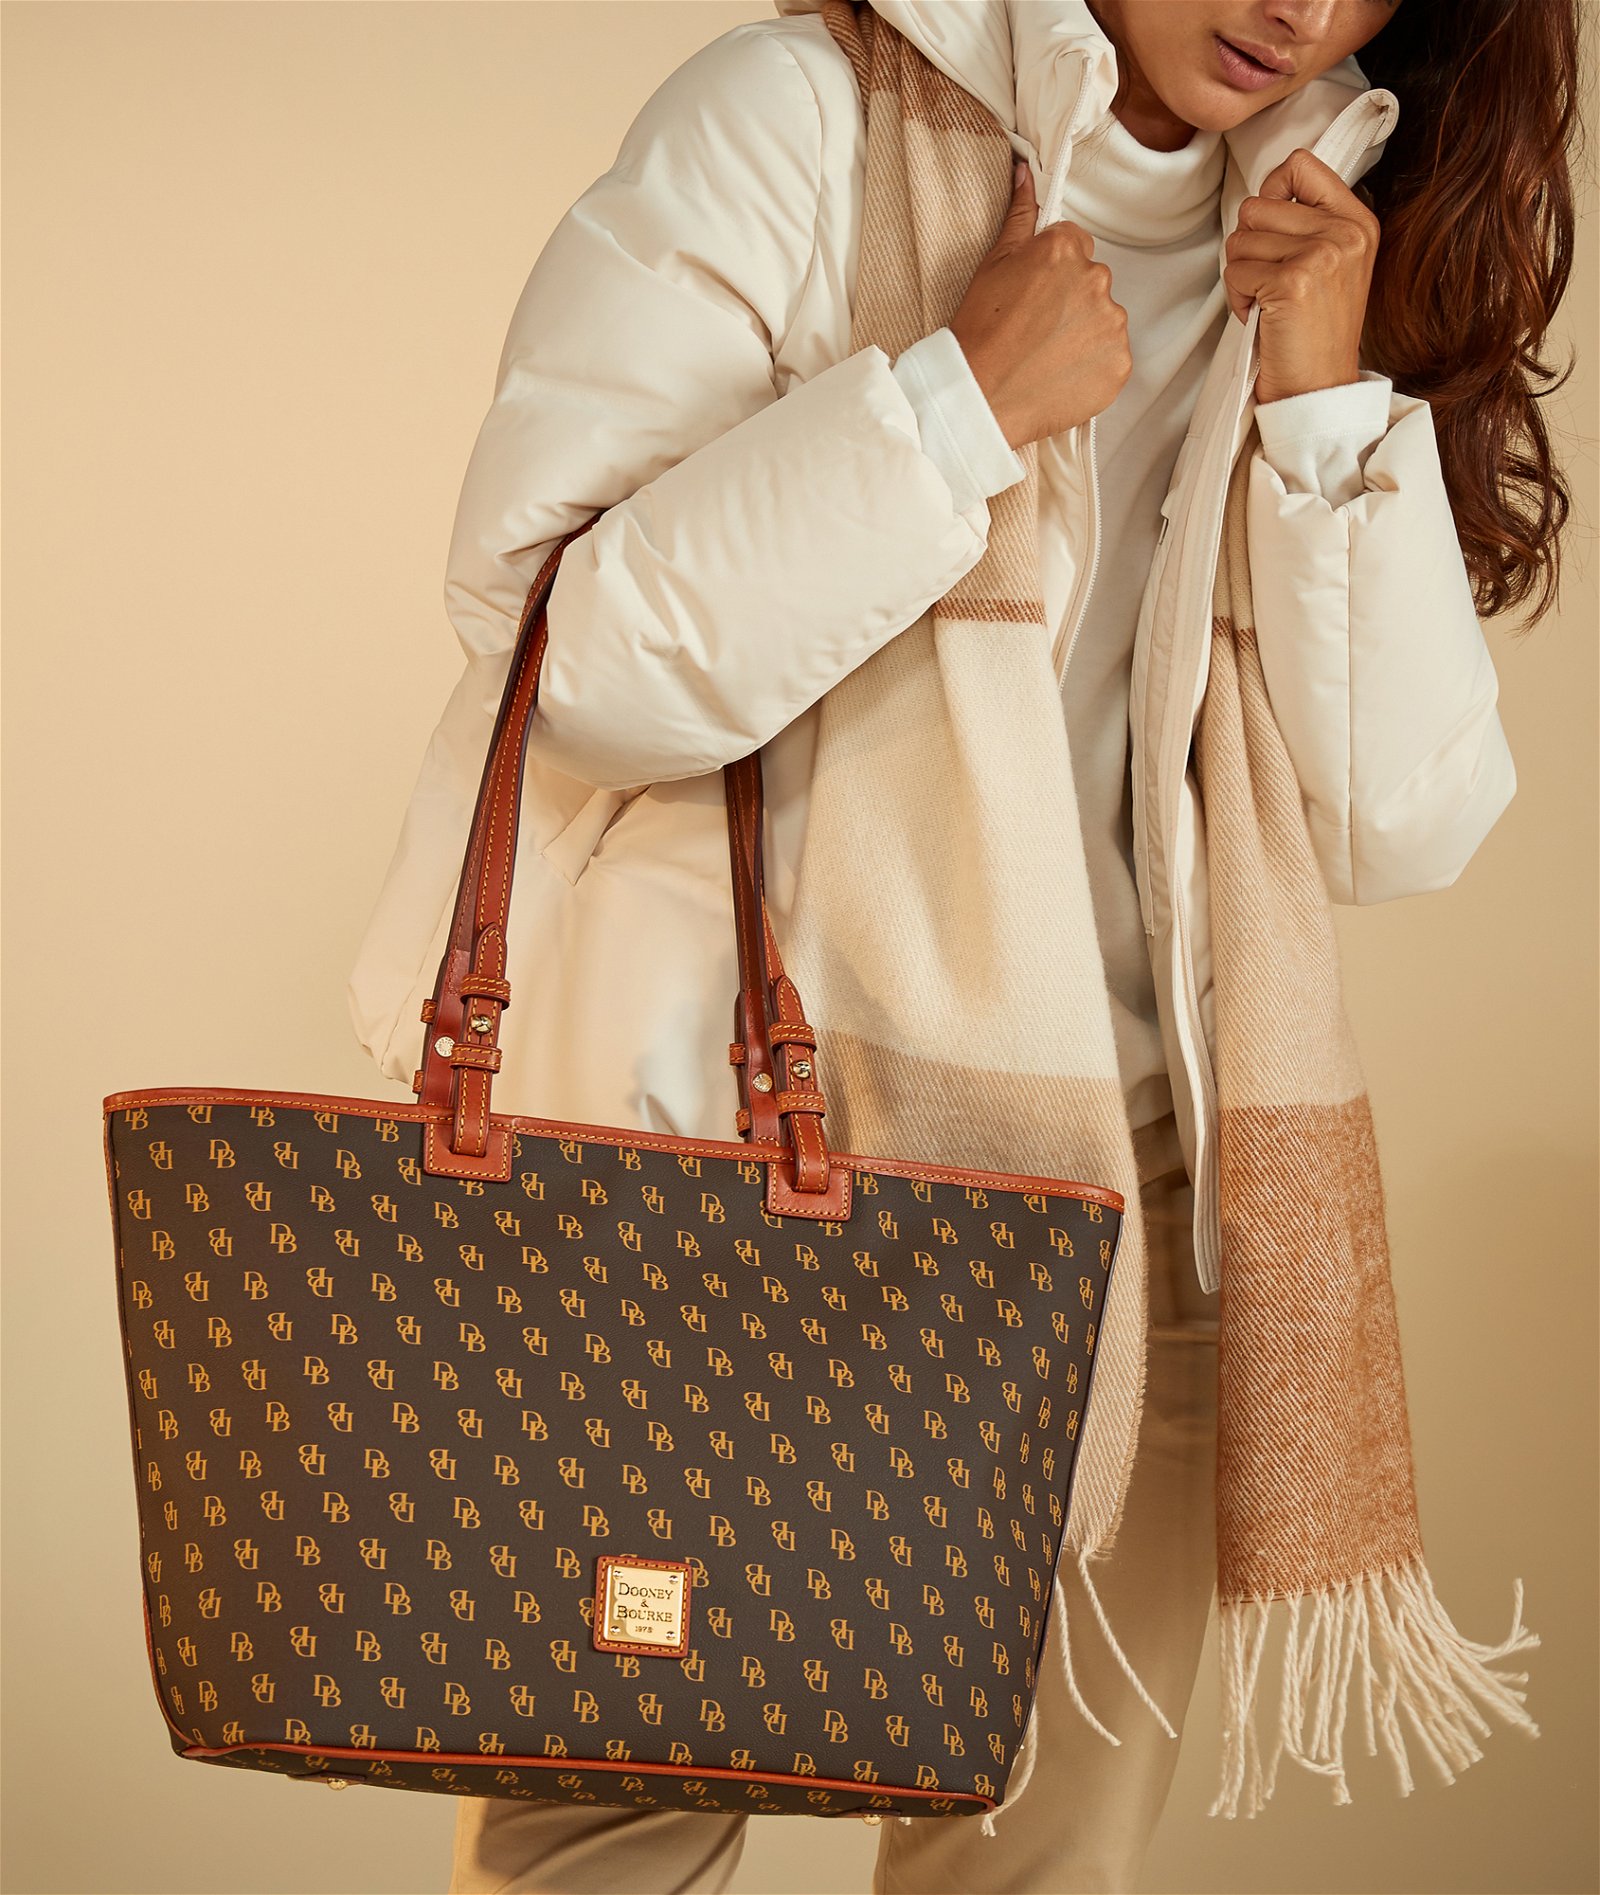 Dooney and Bourke: The Gretta Collection is up to 40% off!